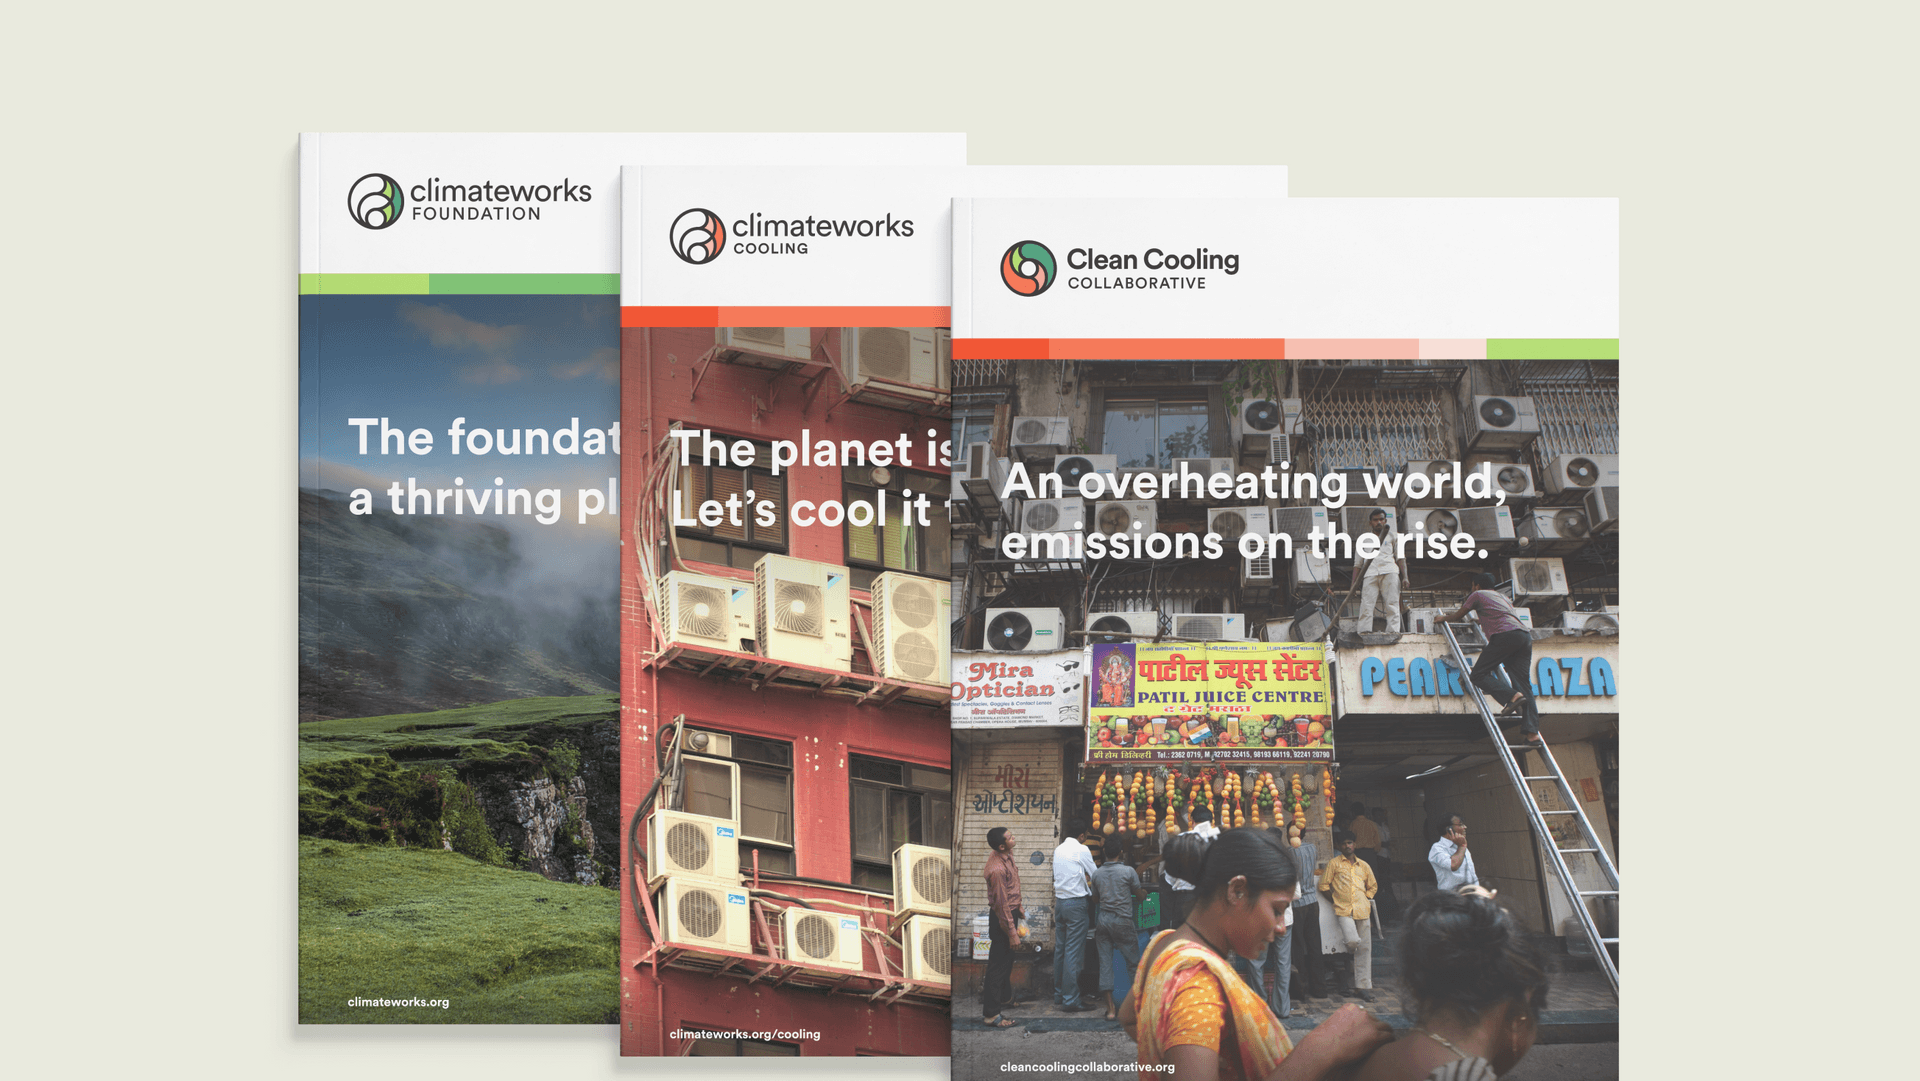 A brand platform & architecture for growing climate change mitigation needs.